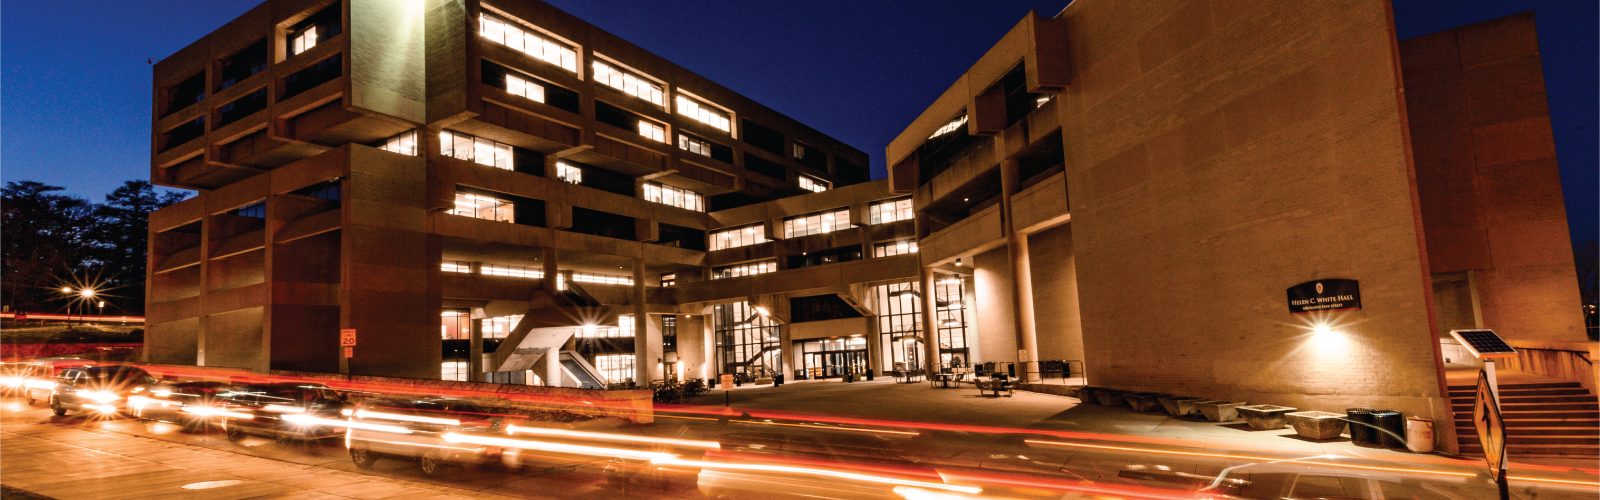 Photo of Helen C White Hall at night with traffic on Observatory Drive.